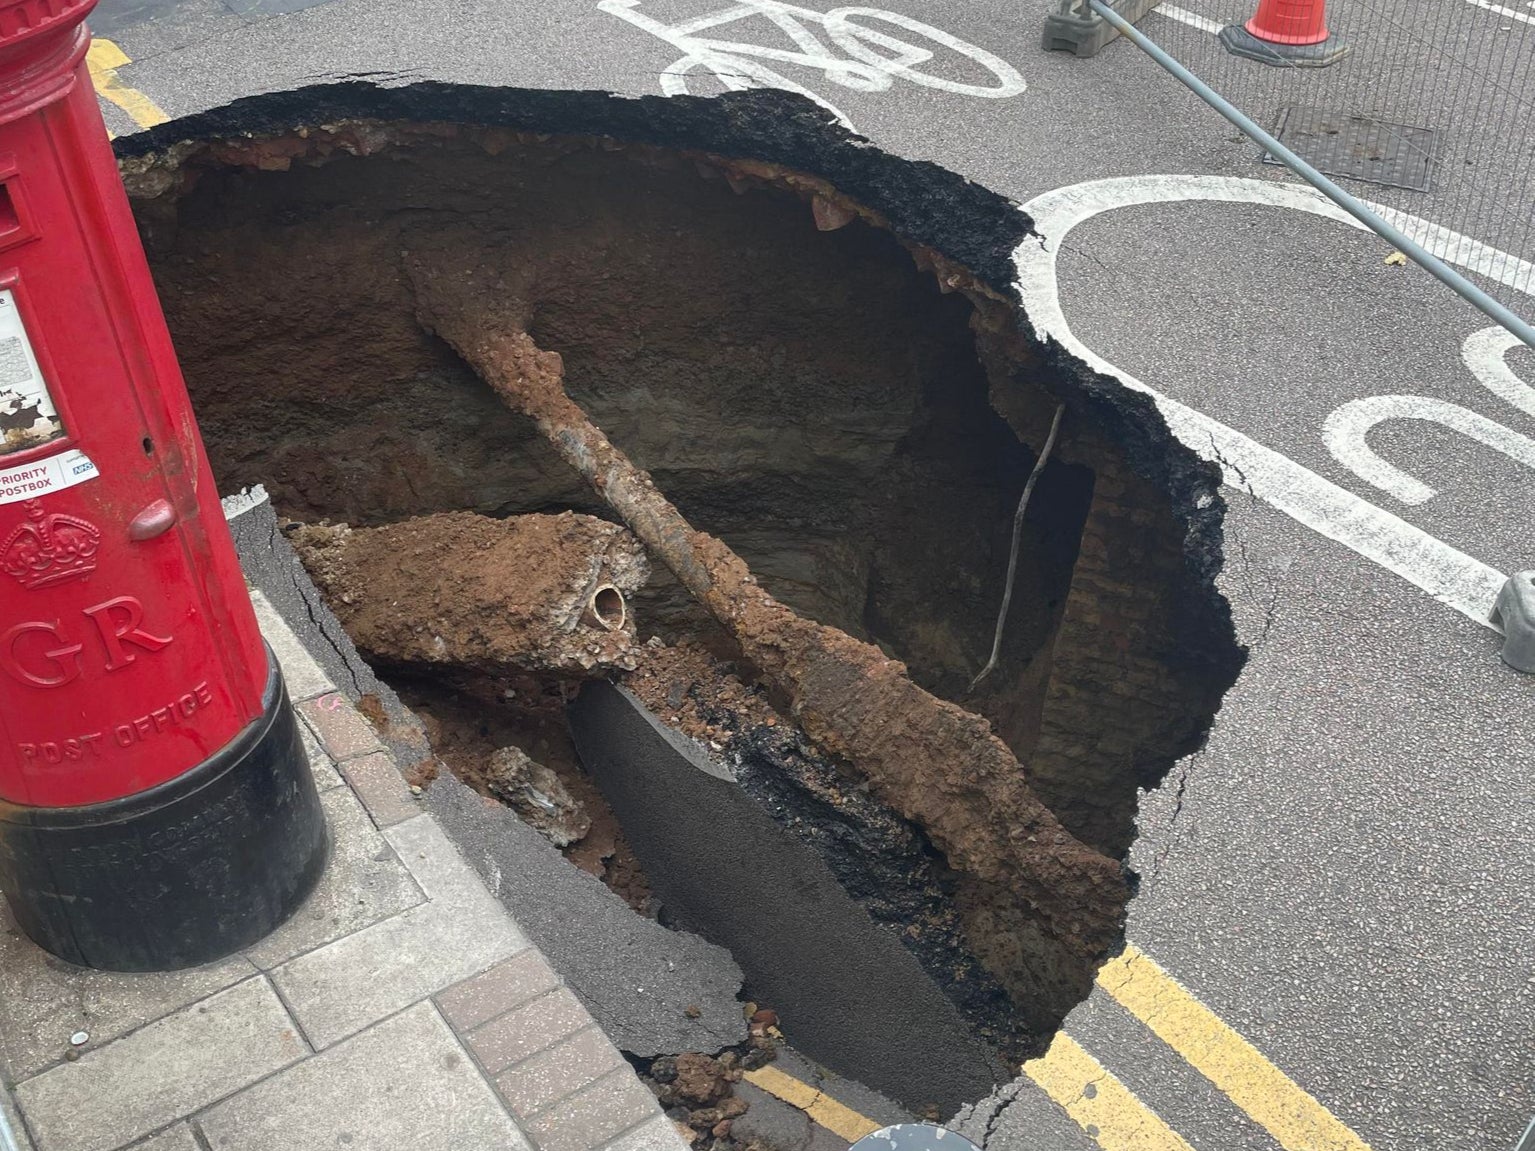 Residents on Dunvegan Road in Eltham, Greenwich, London awoke to discover a sinkhole the size of a small car opened up overnight on September 12